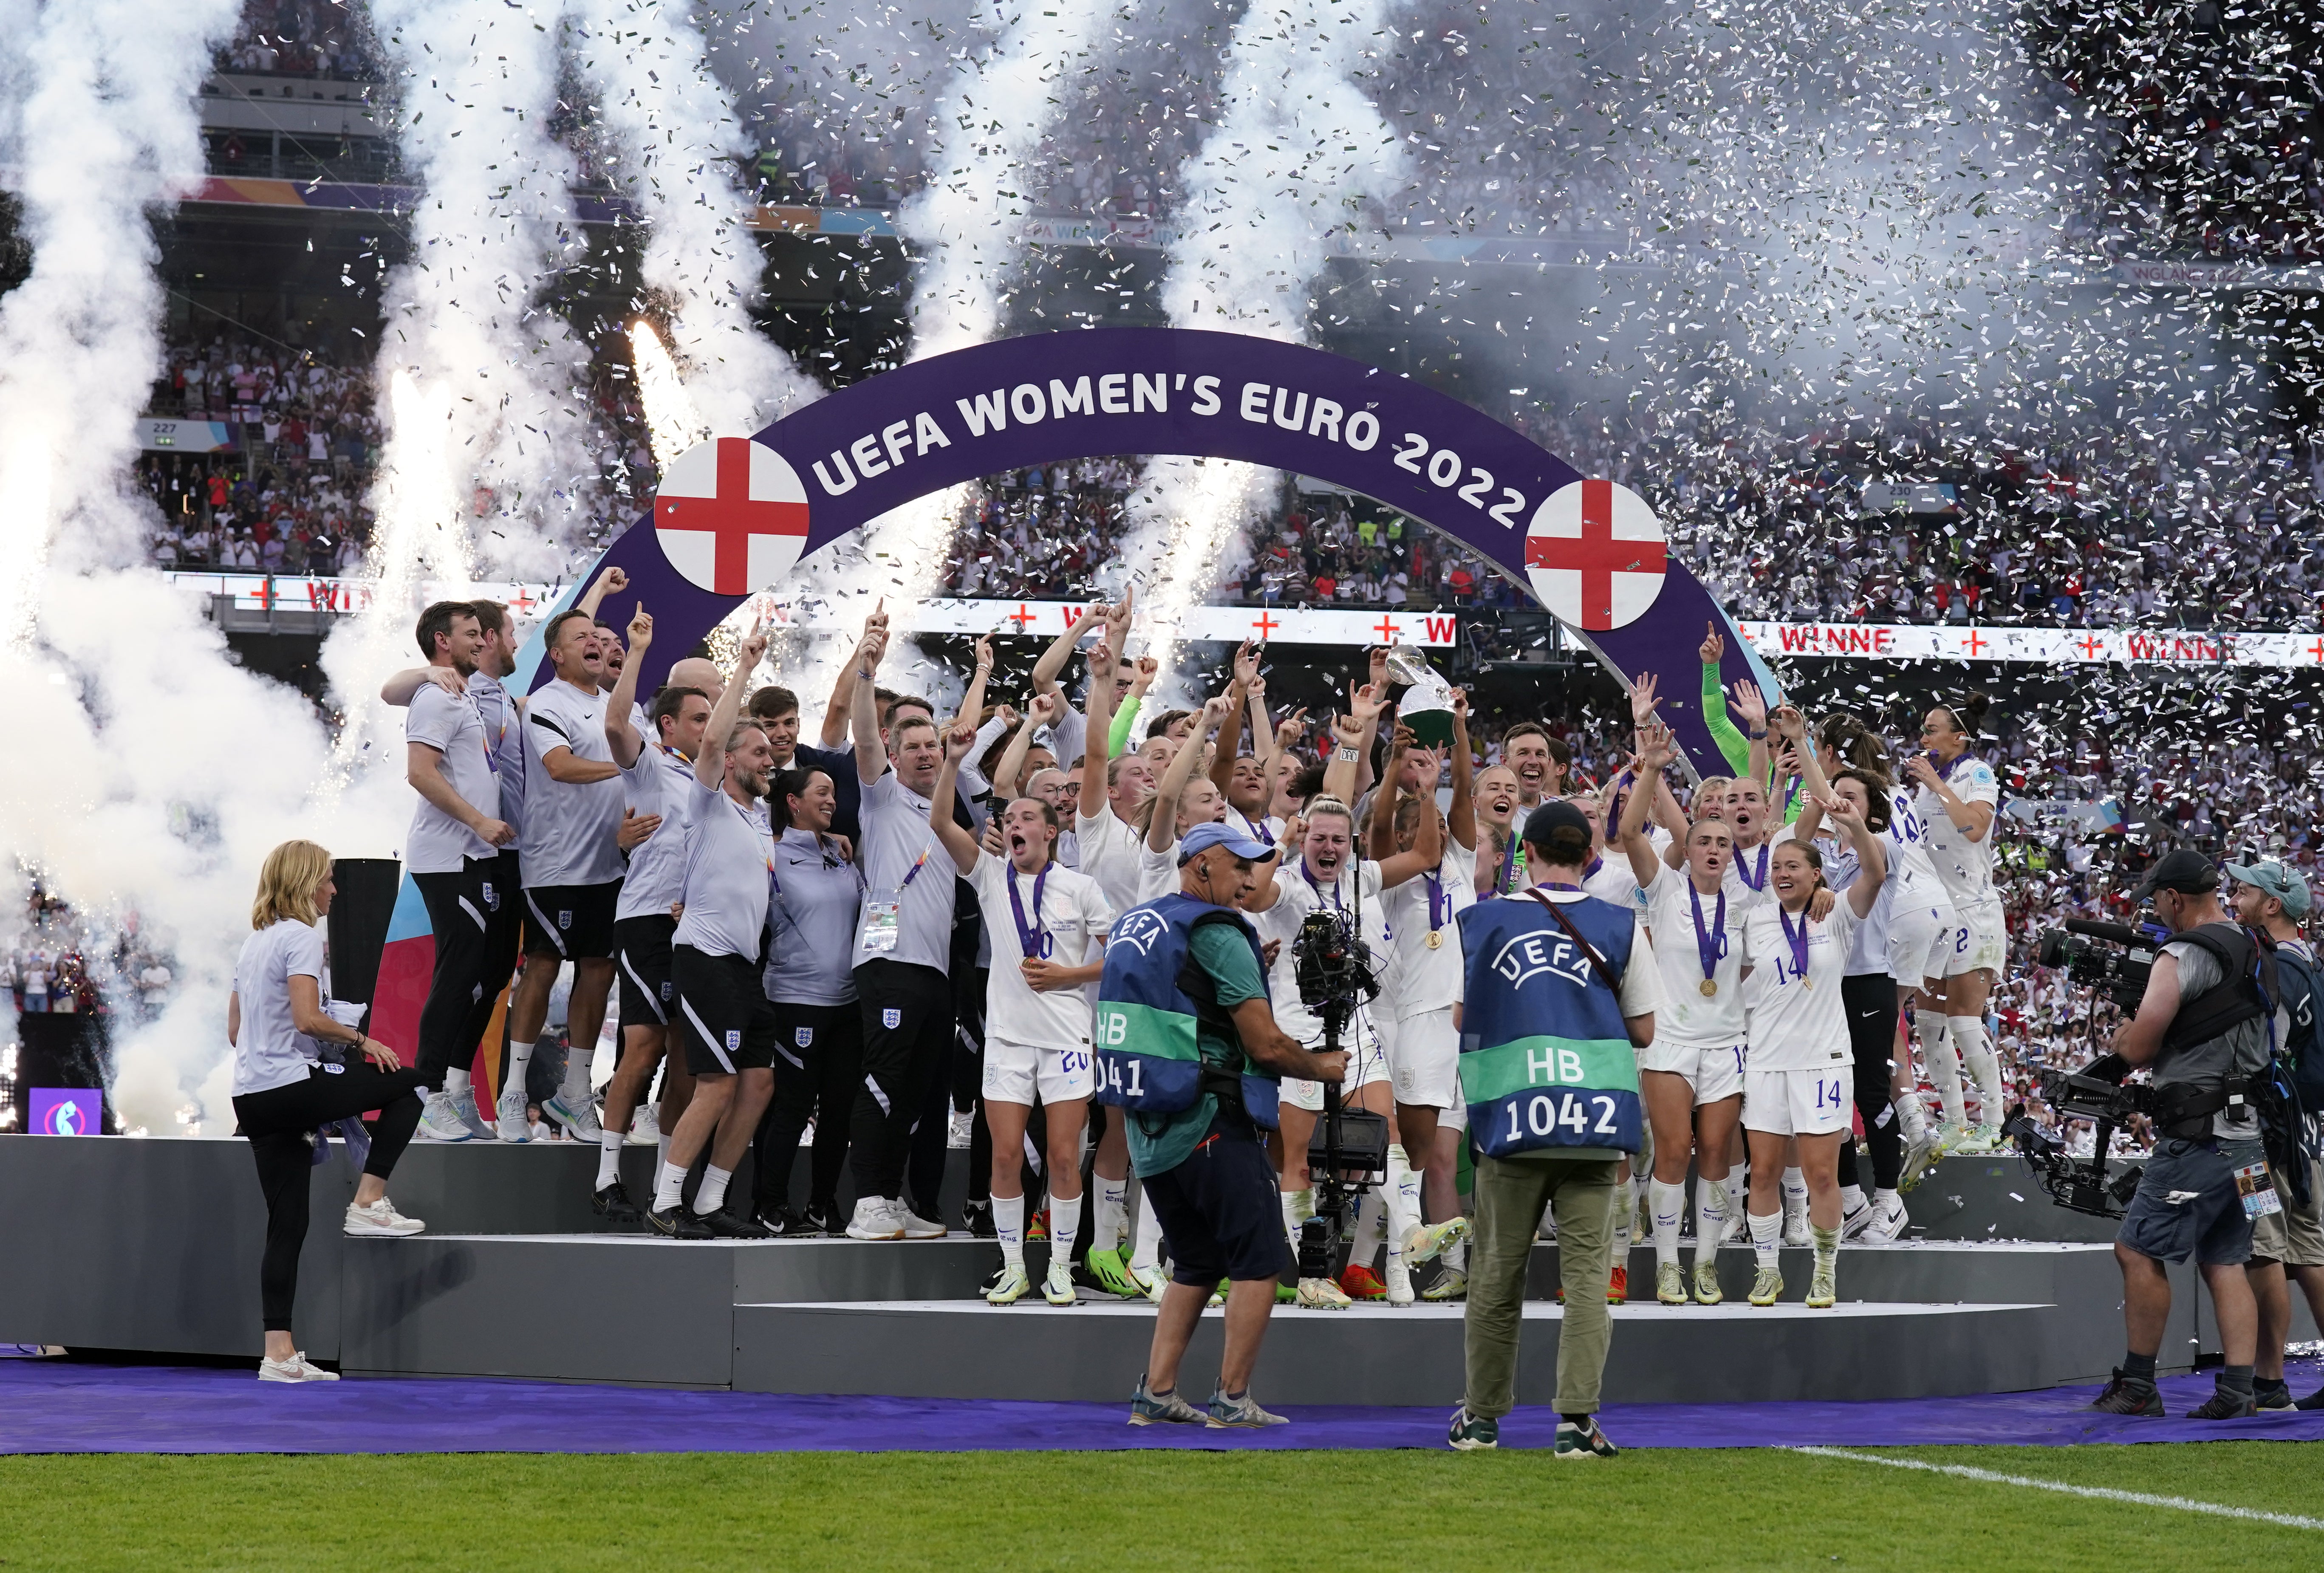 Sir Lindsay Hoyle wants England’s women to replicate the success of the Lionesses in the World Cup (Danny Lawson/PA)